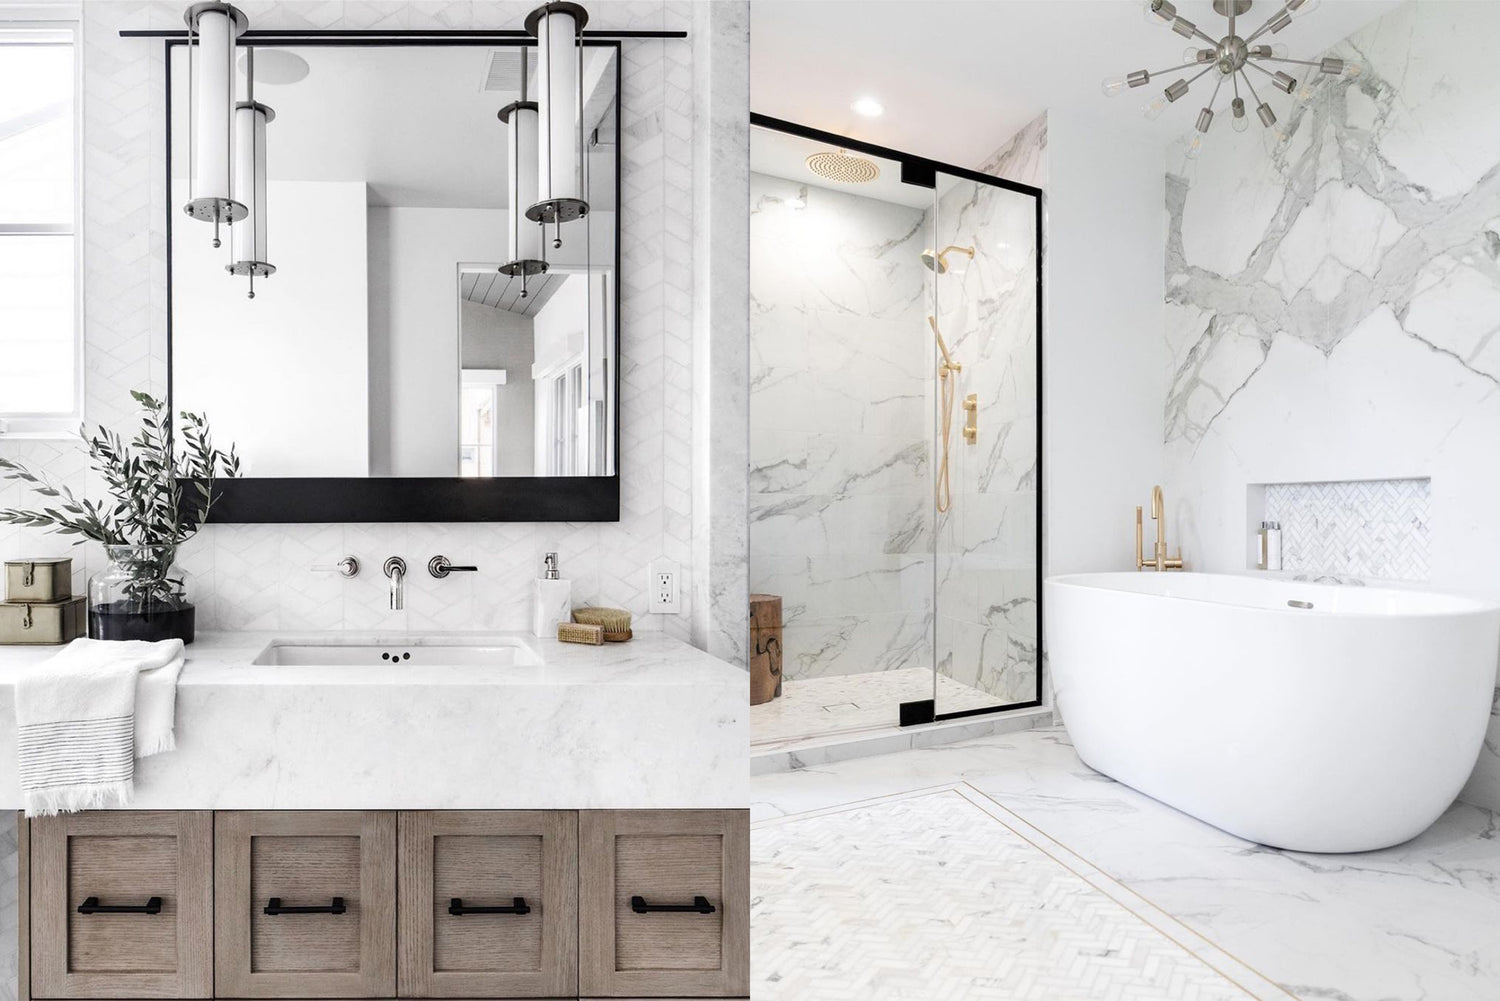 7 Things to Consider When Using White Marble in a Bathroom